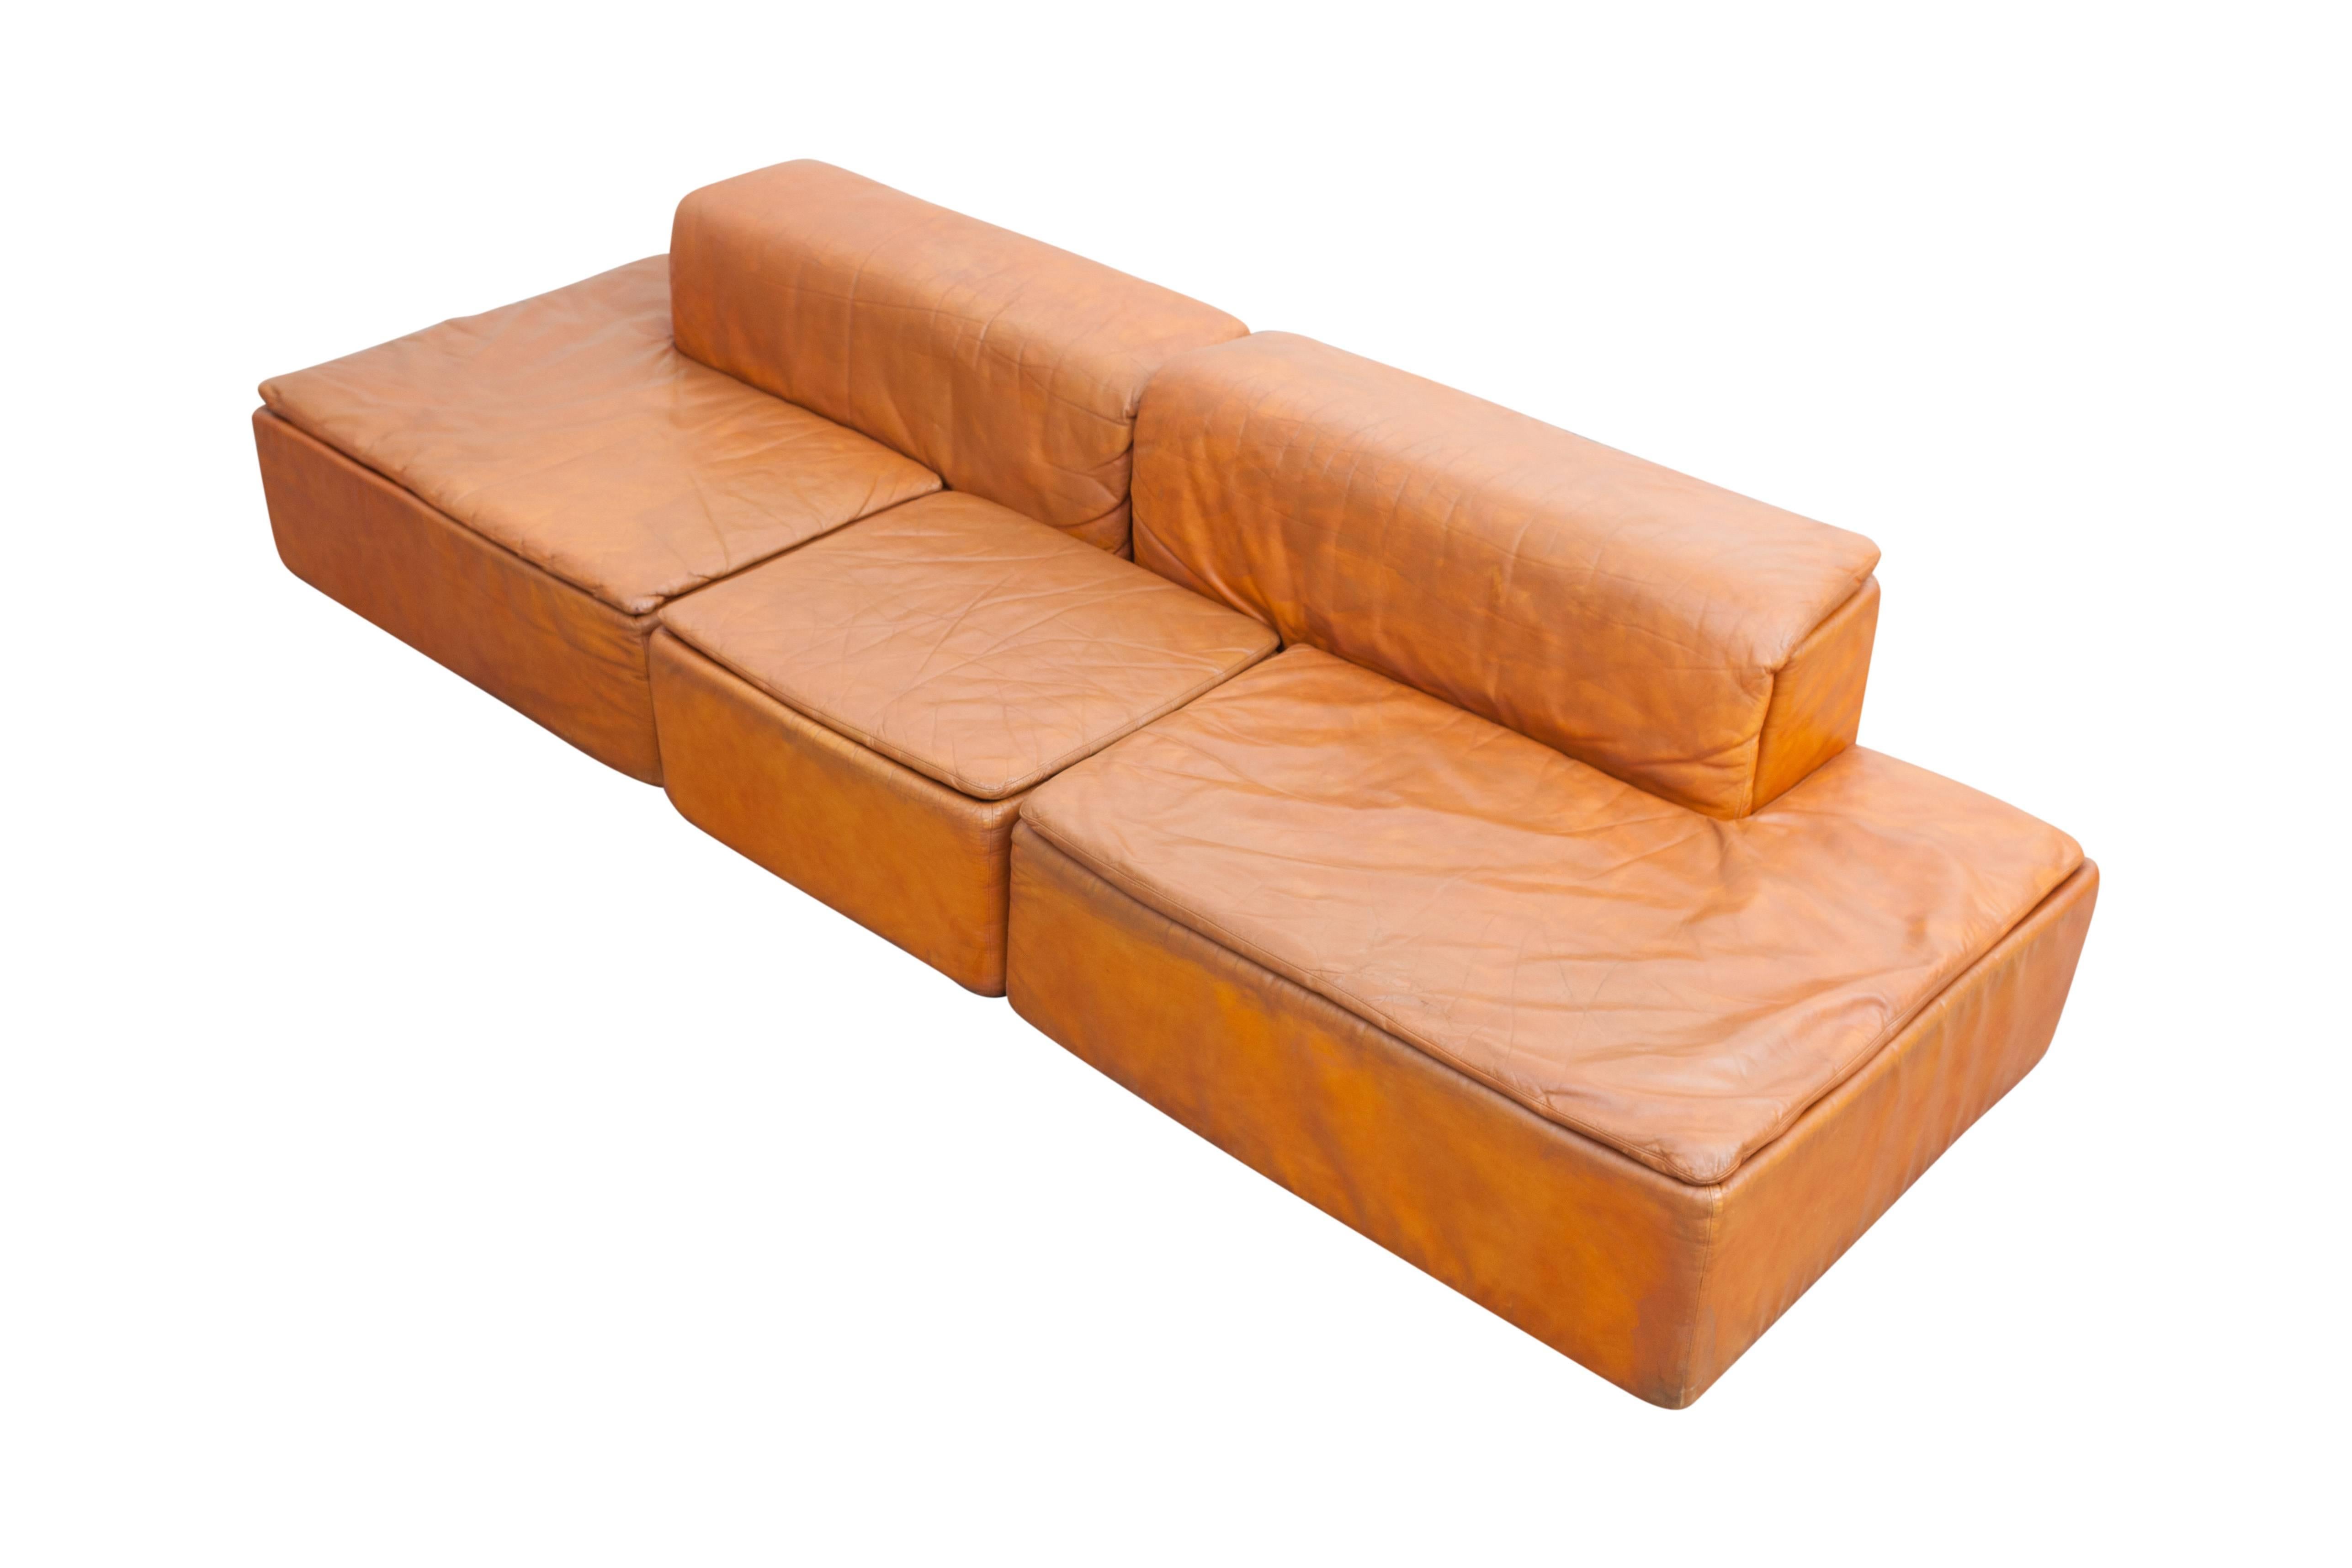 Large modular sofas in orange leather, designed by architect Claudio Salocchi for Sormani.

The complete set consists of seven items: four large pieces with back rest and three footstools.
The pieces can be arrange in many different ways,